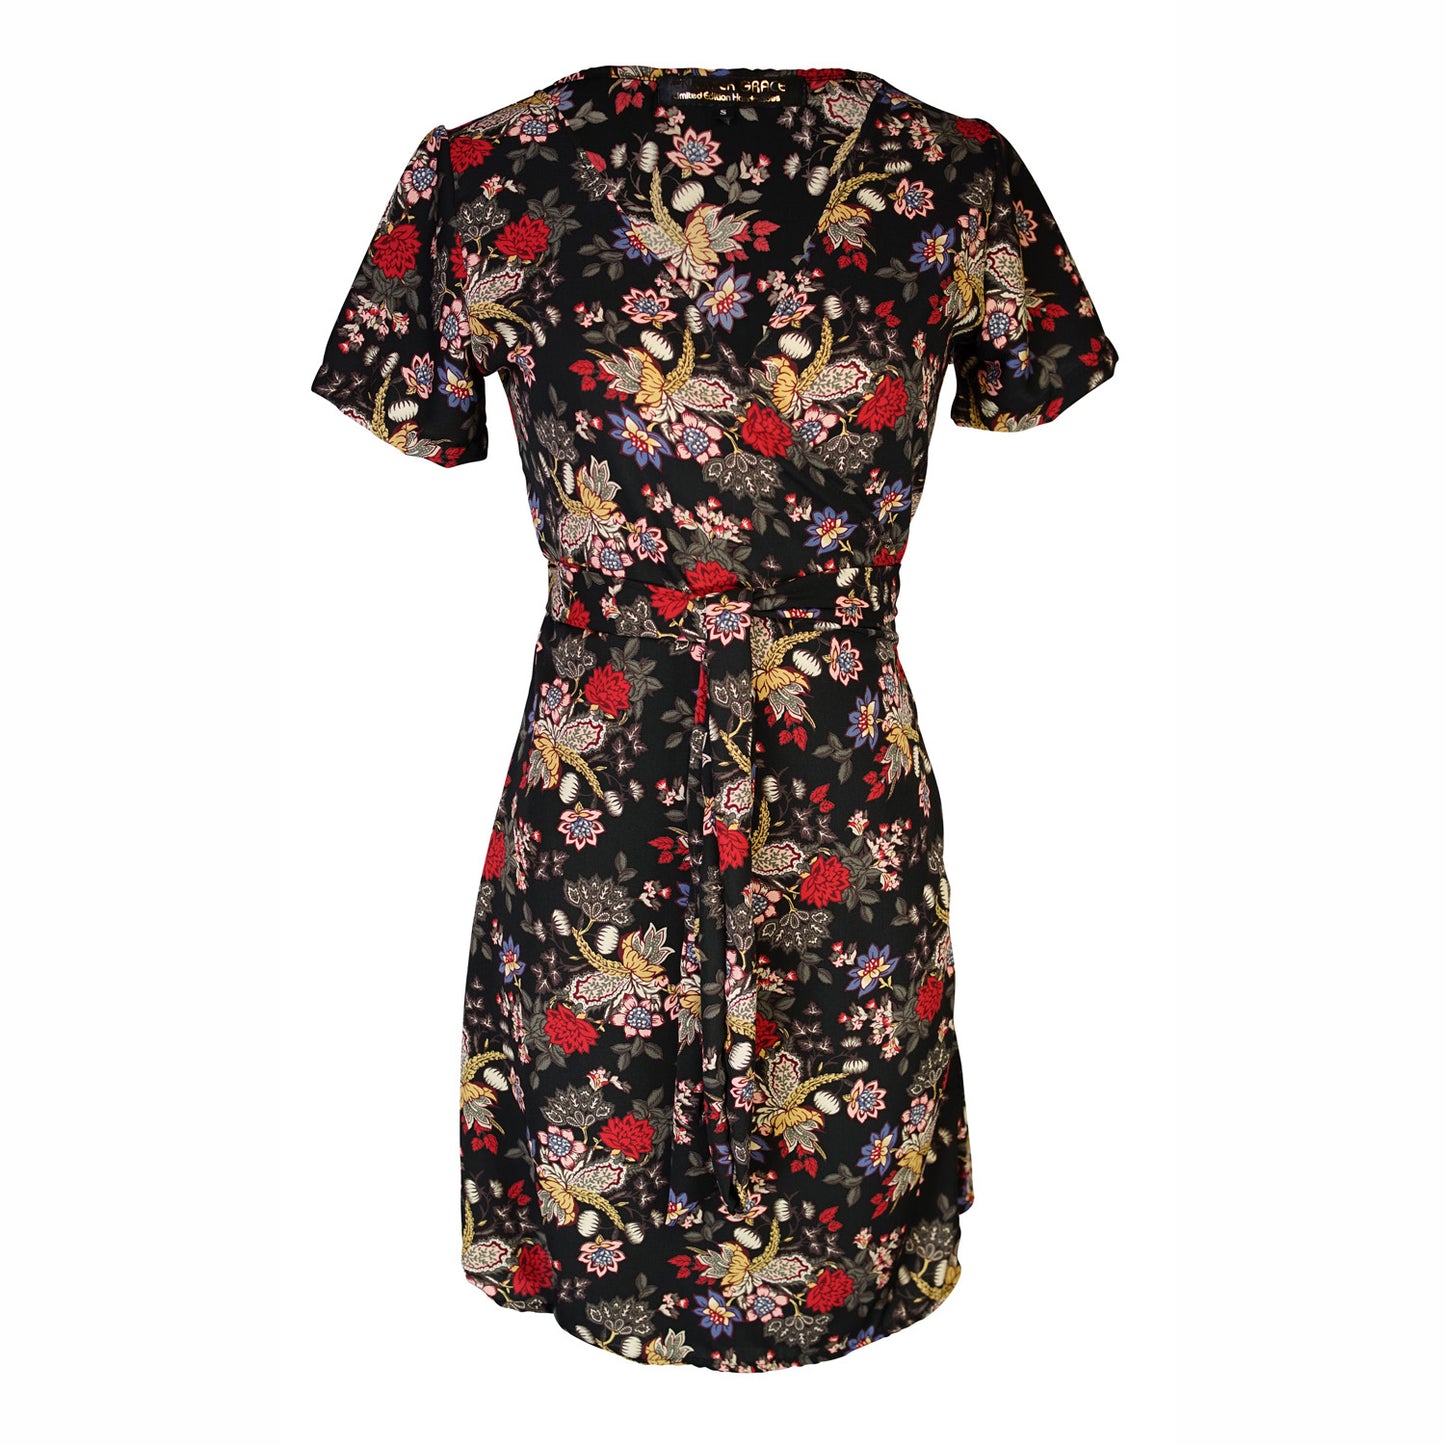 Short-sleeve, v-neck wrap dress. Mini in length, with black base with multicolor vintage-inspired botanical floral flower print. Bohemian summer dress in style.